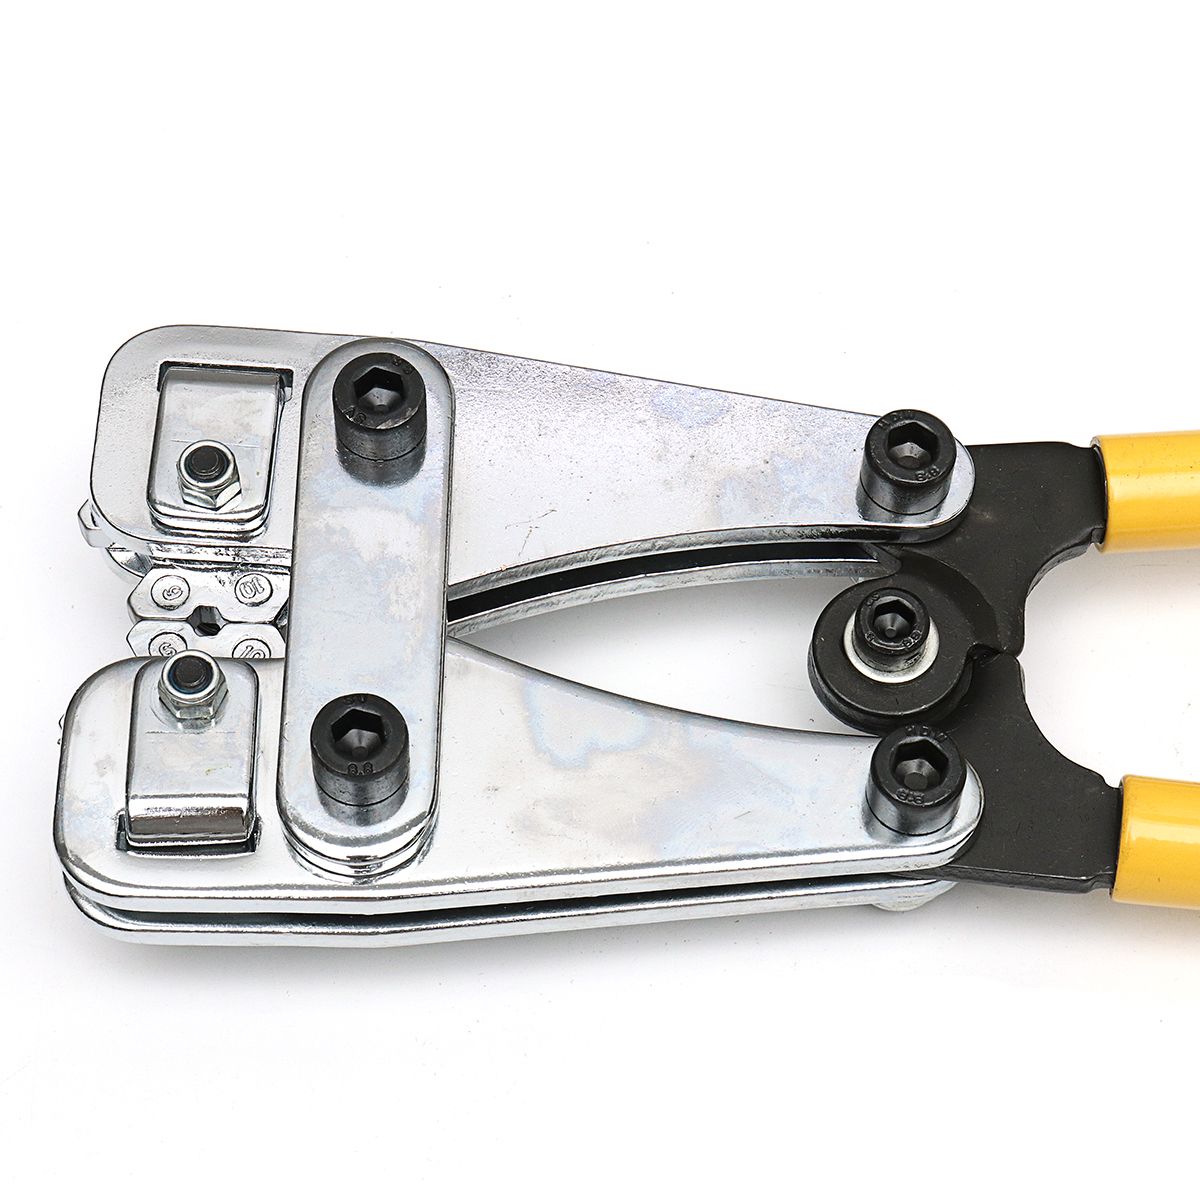 HY-0650-6-50mmsup2-Wire-Terminal-Crimper-Plier-Tool-Cable-Lug-Crimping-Plier-Connector-1319189